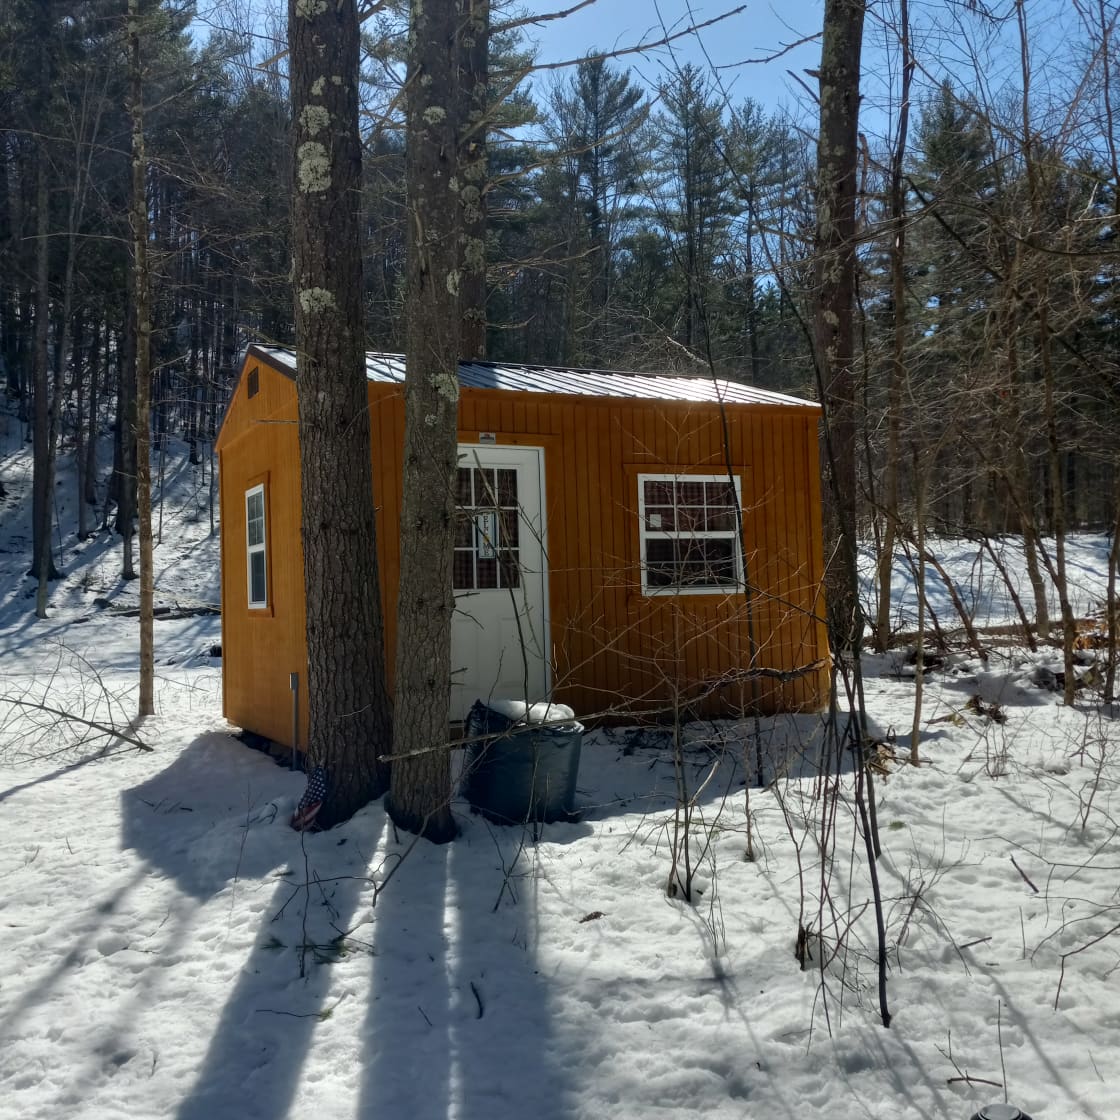 East Branch Hikers delight cabin